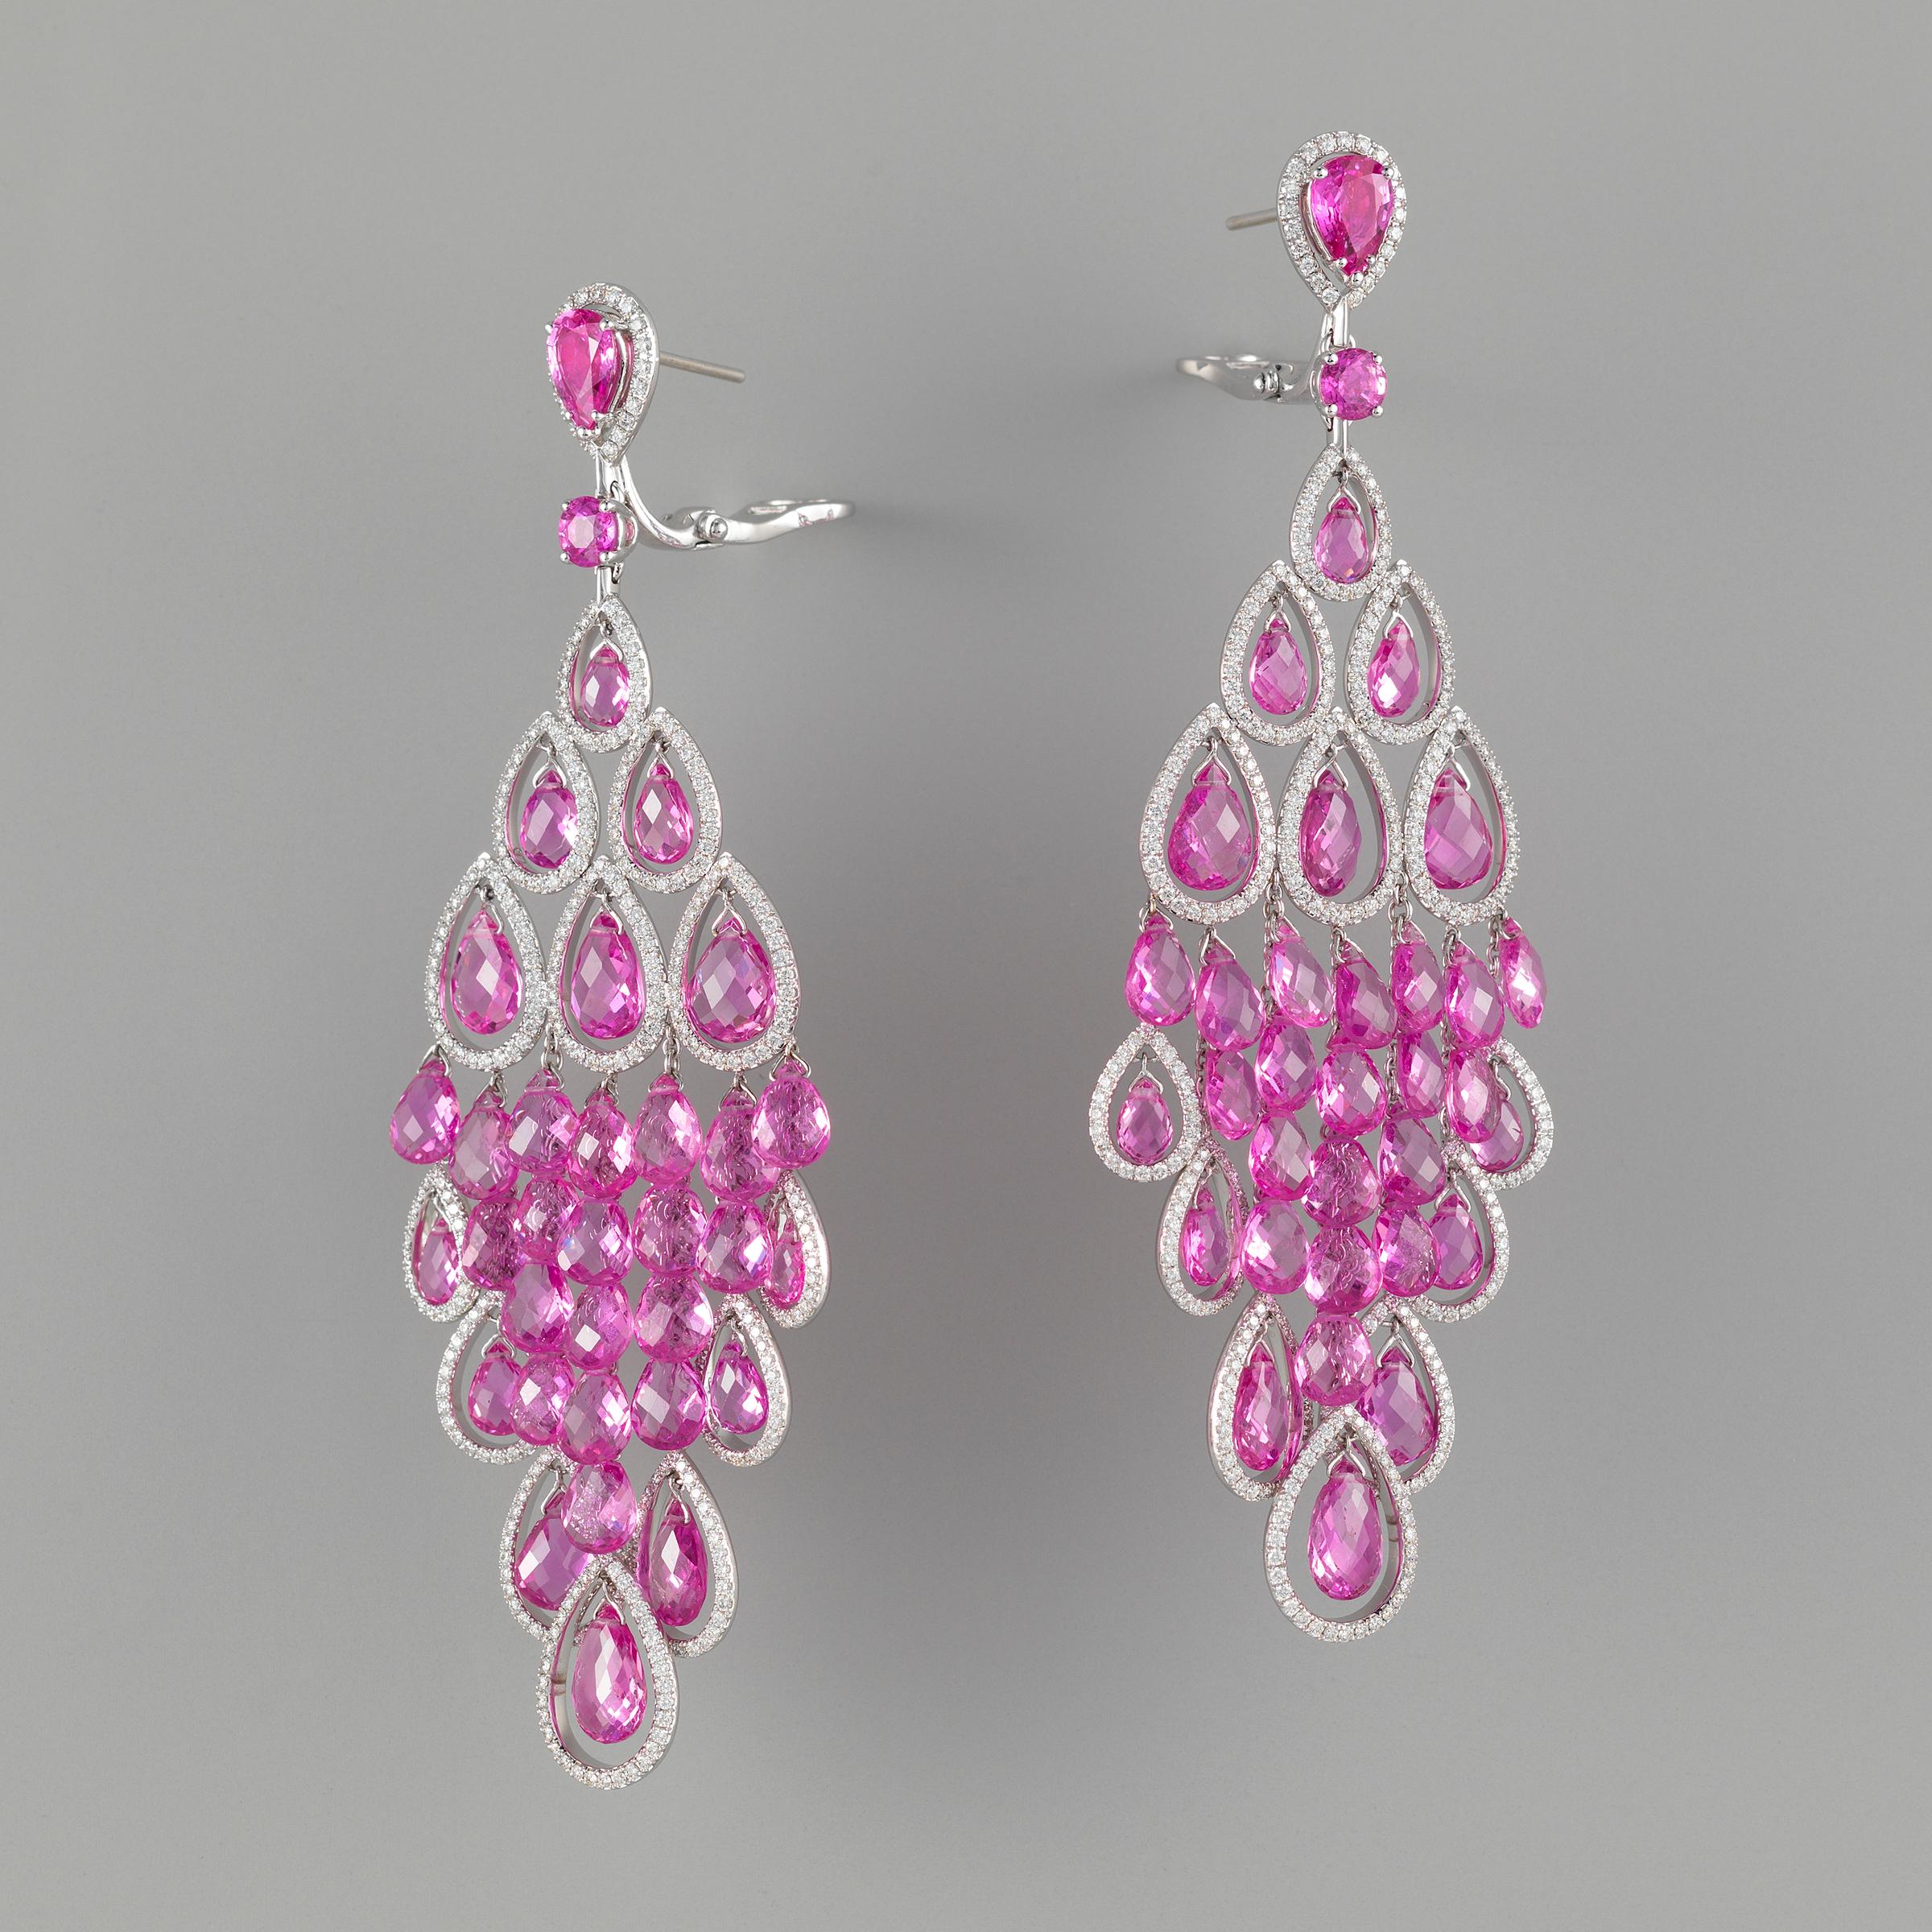 Mixed Cut Graff Diamond Pink Sapphire Magnificent 60 Carats Earrings in 18k Gold 